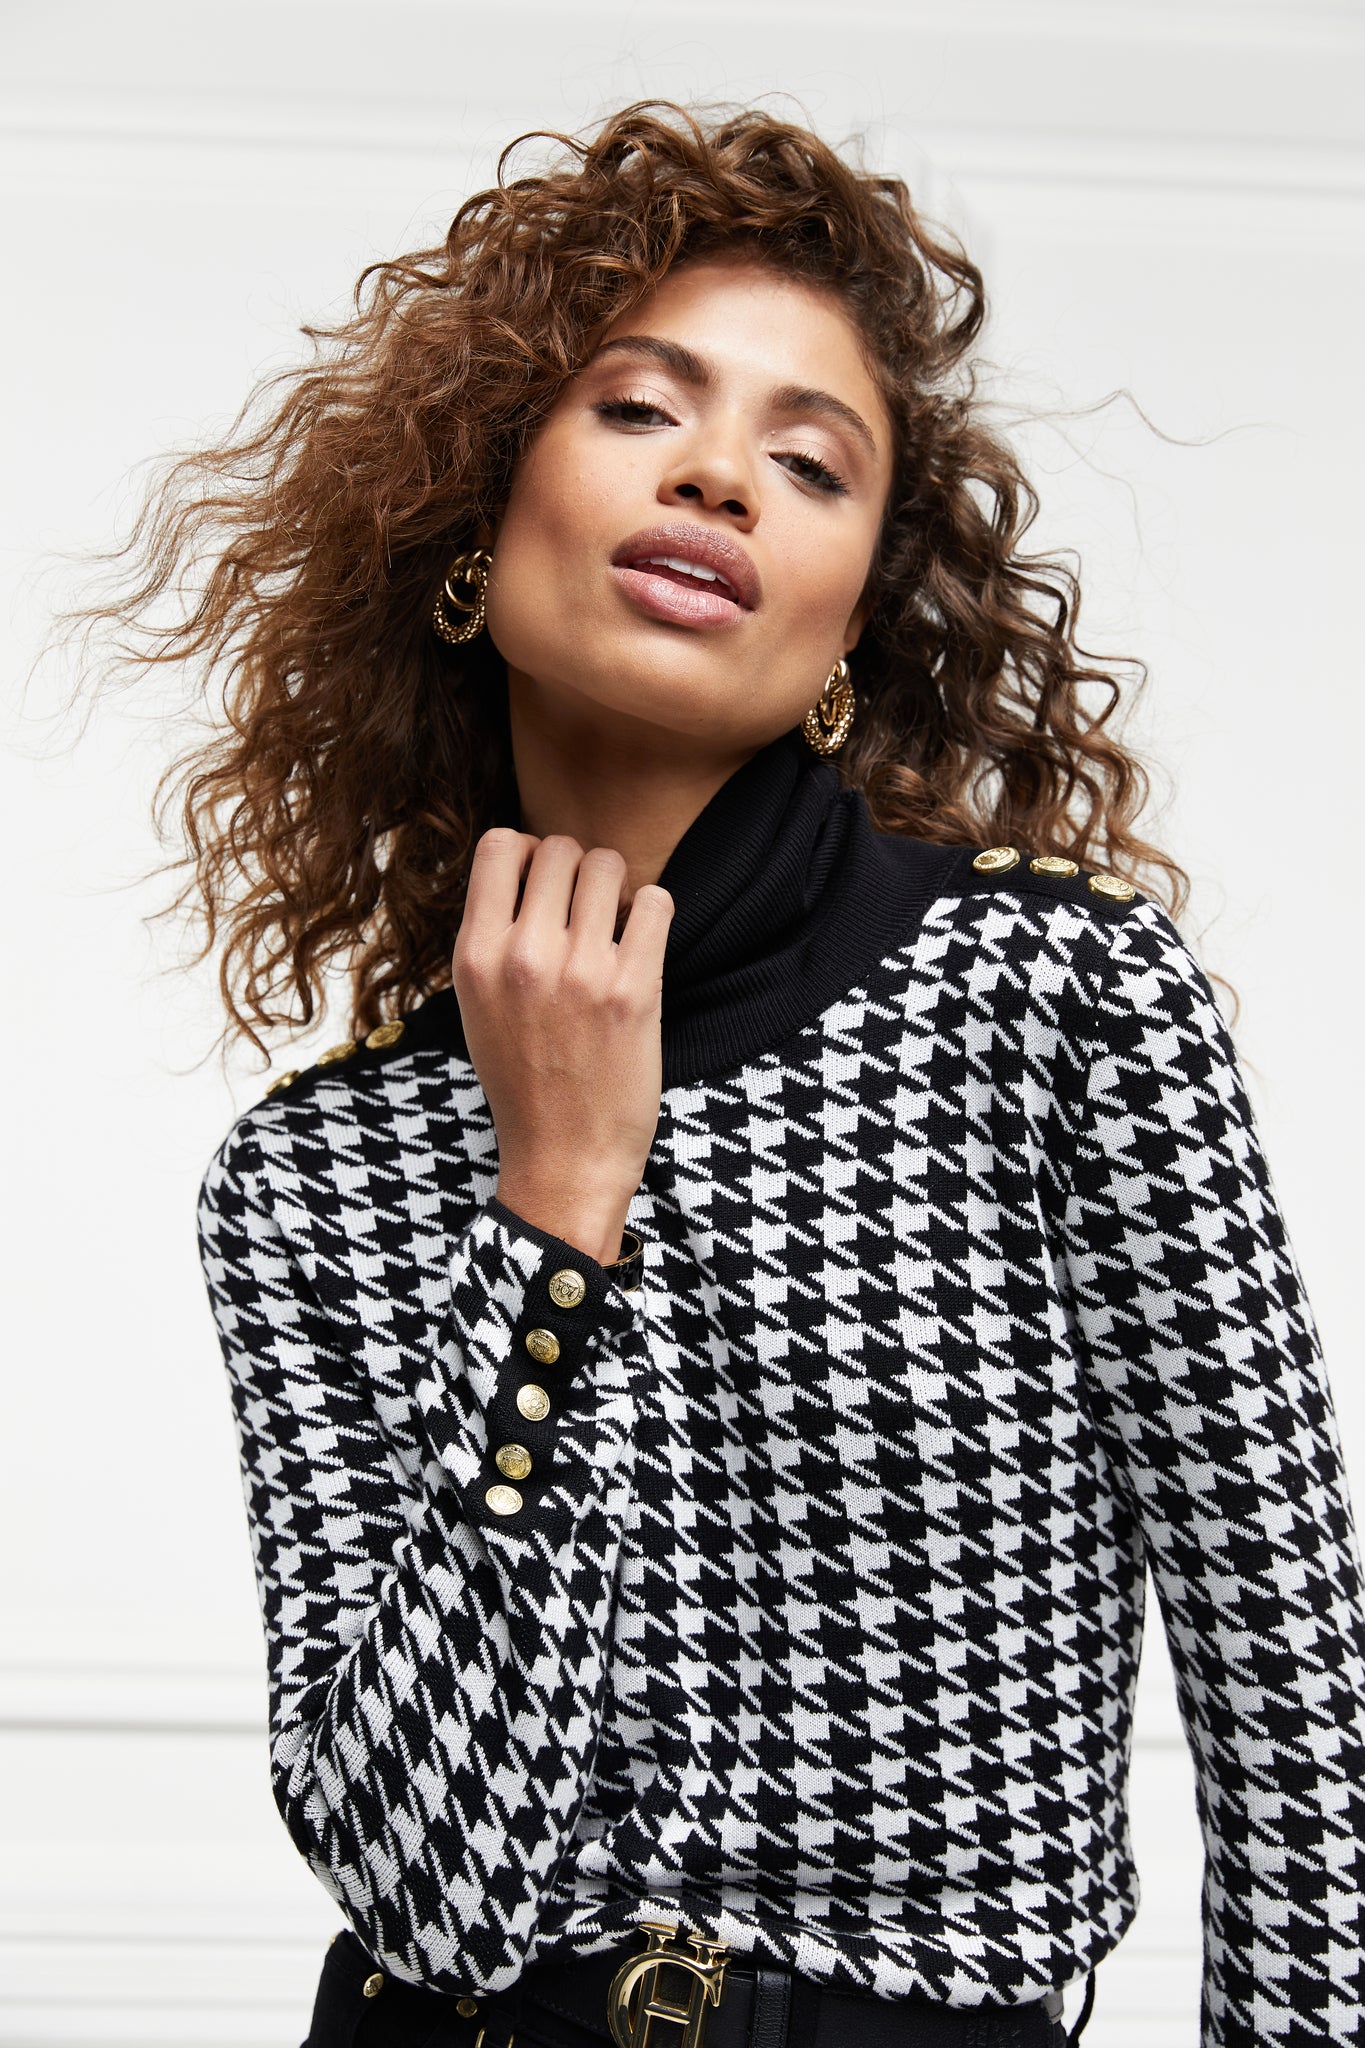 a classic black and white houndstooth jumper with contrast black roll neck collar